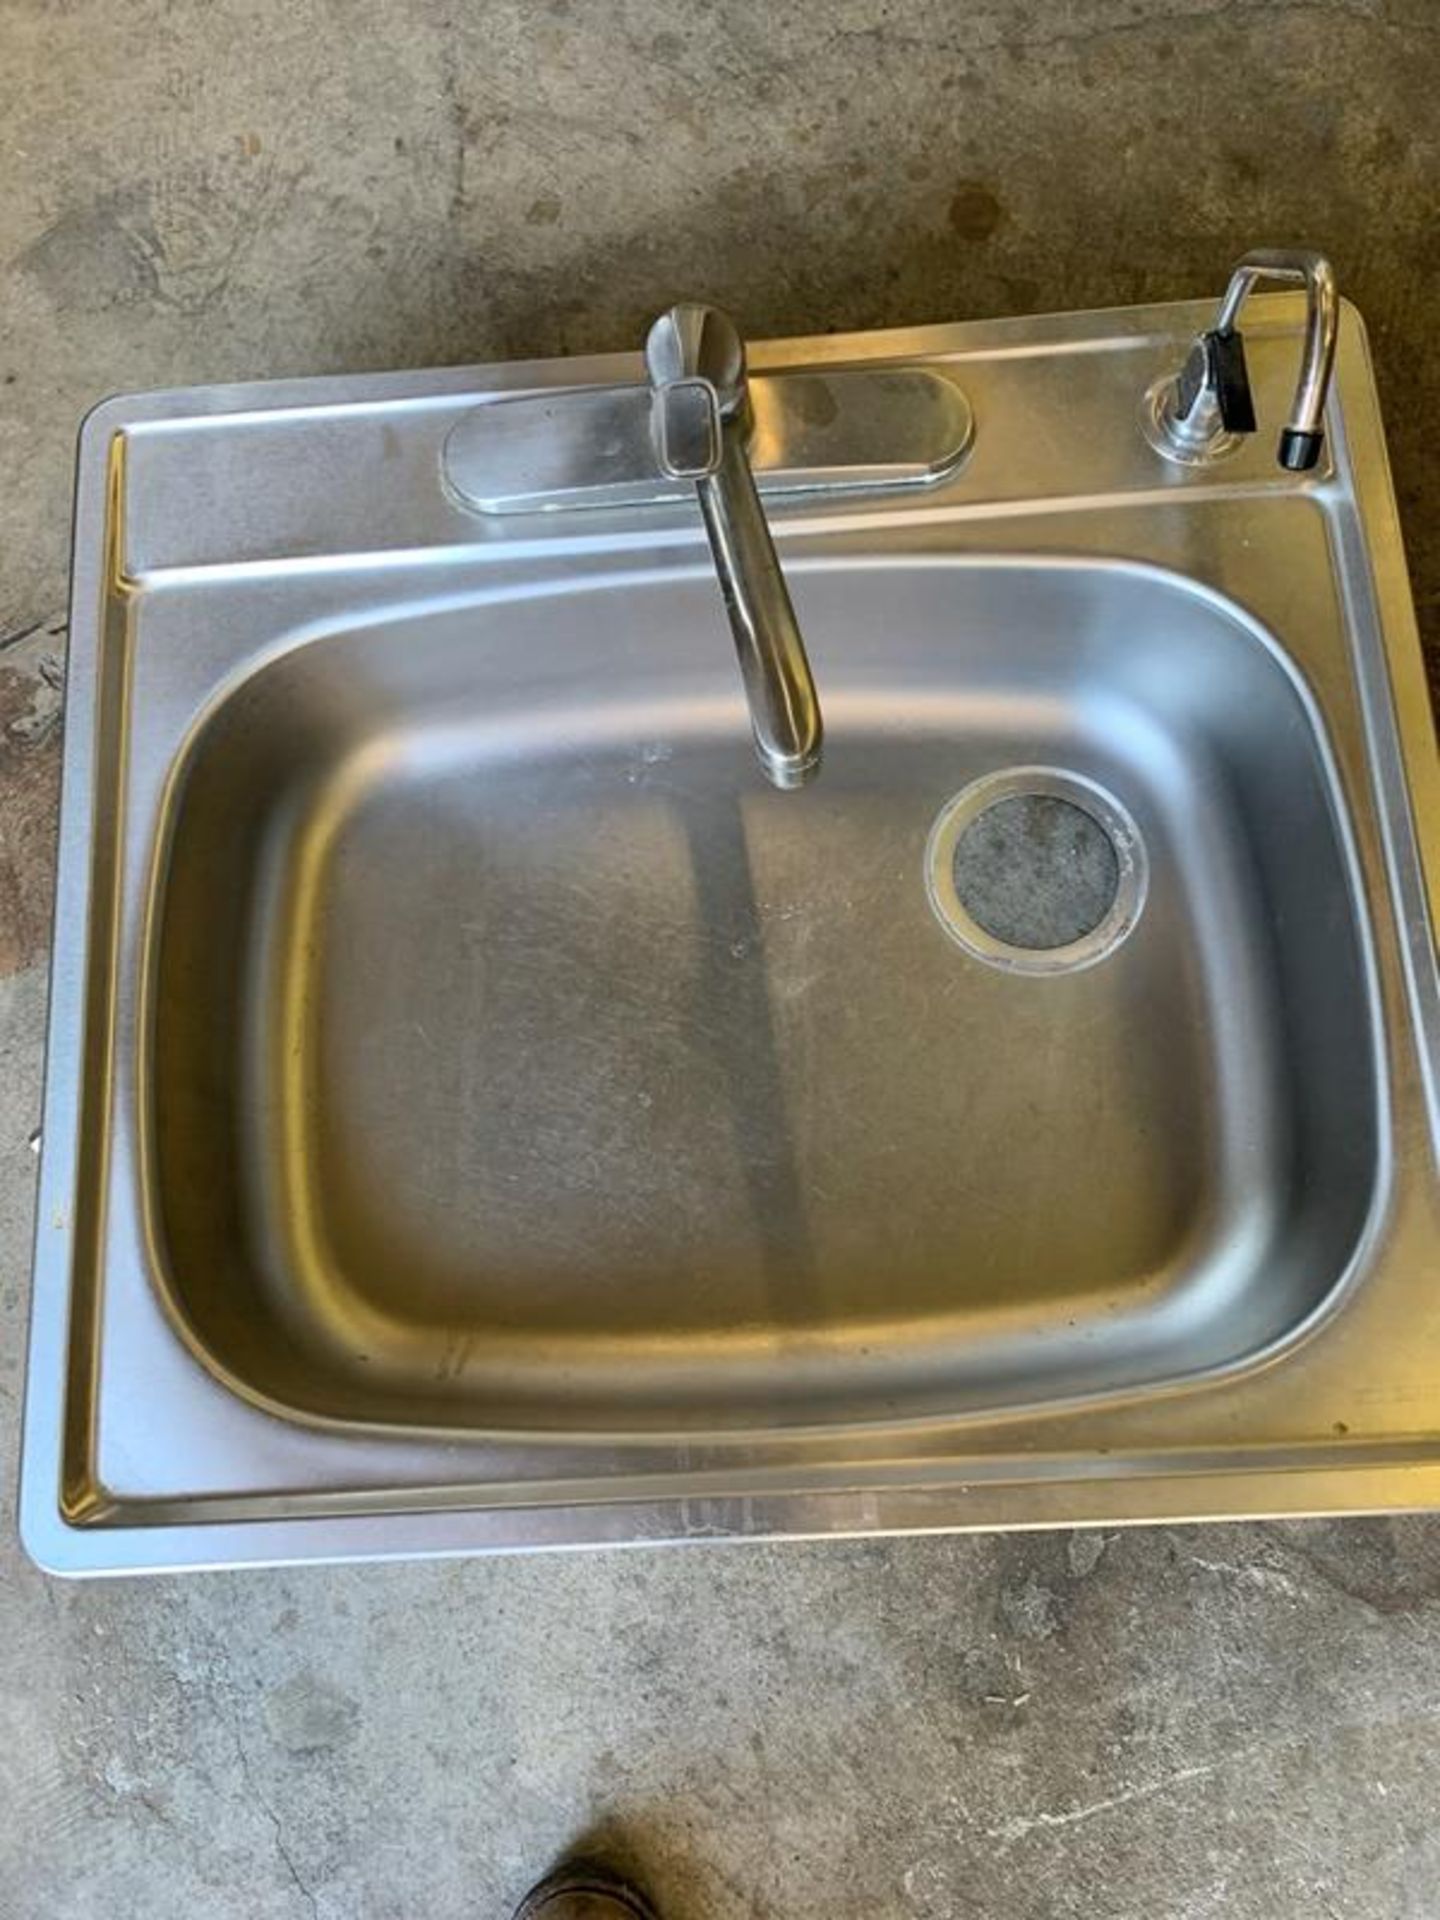 Lot of (3) Stainless Steel Sinks,(1) double tub 22" W X 33" L (dented), (1) single tub 22" W X 26" L